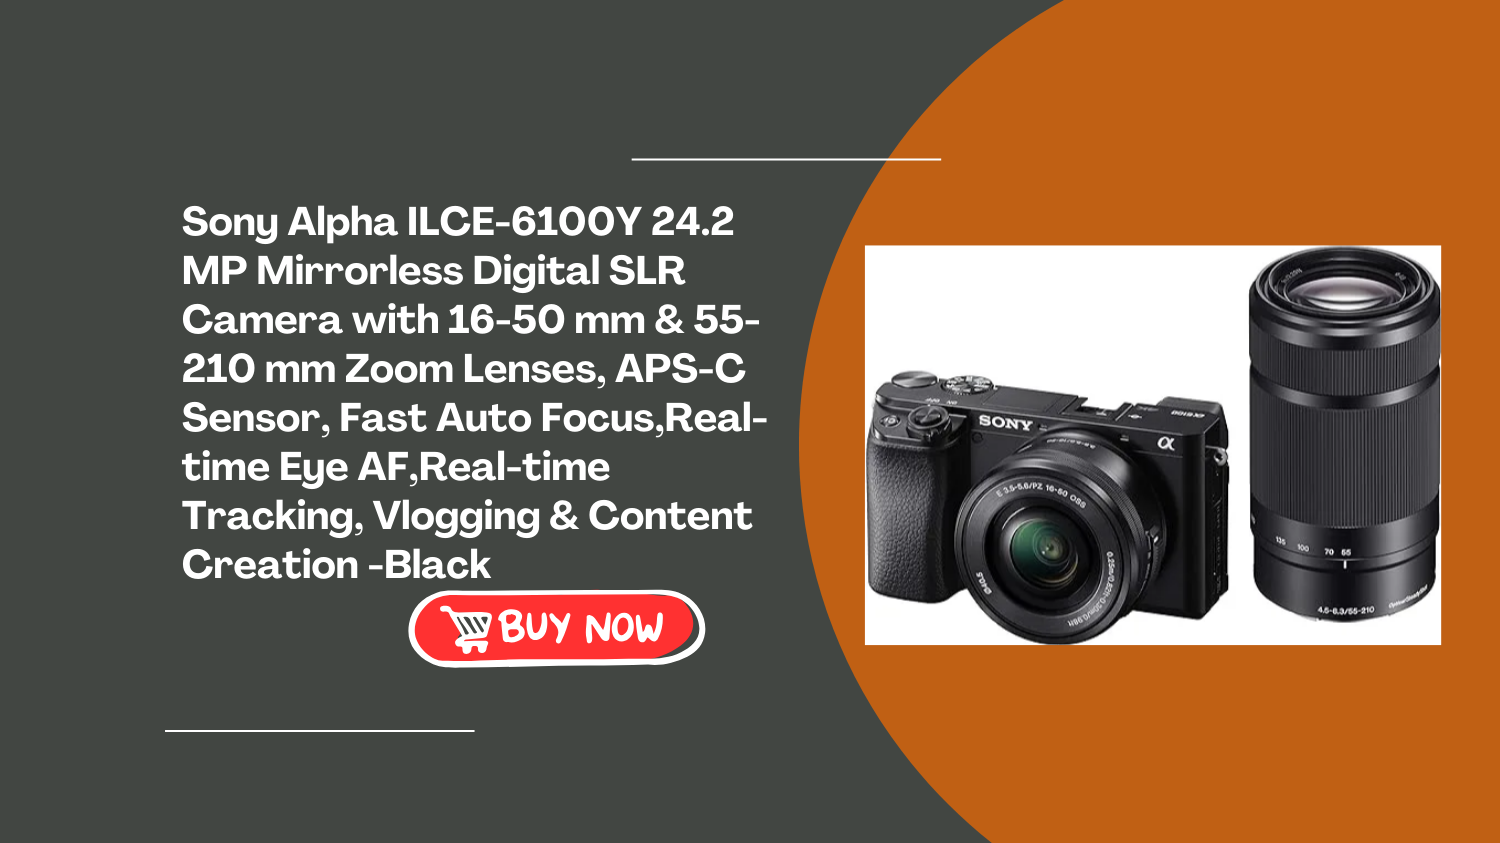 sony-alpha-ilce-6100y-24-2-mp-mirrorless-digital-slr-camera-with-16-50-mm-55-210-mm-zoom-lenses-aps-c-sensor-fast-auto-focus-real-time-eye-af-real-time-tracking-vlogging-content-creation-black